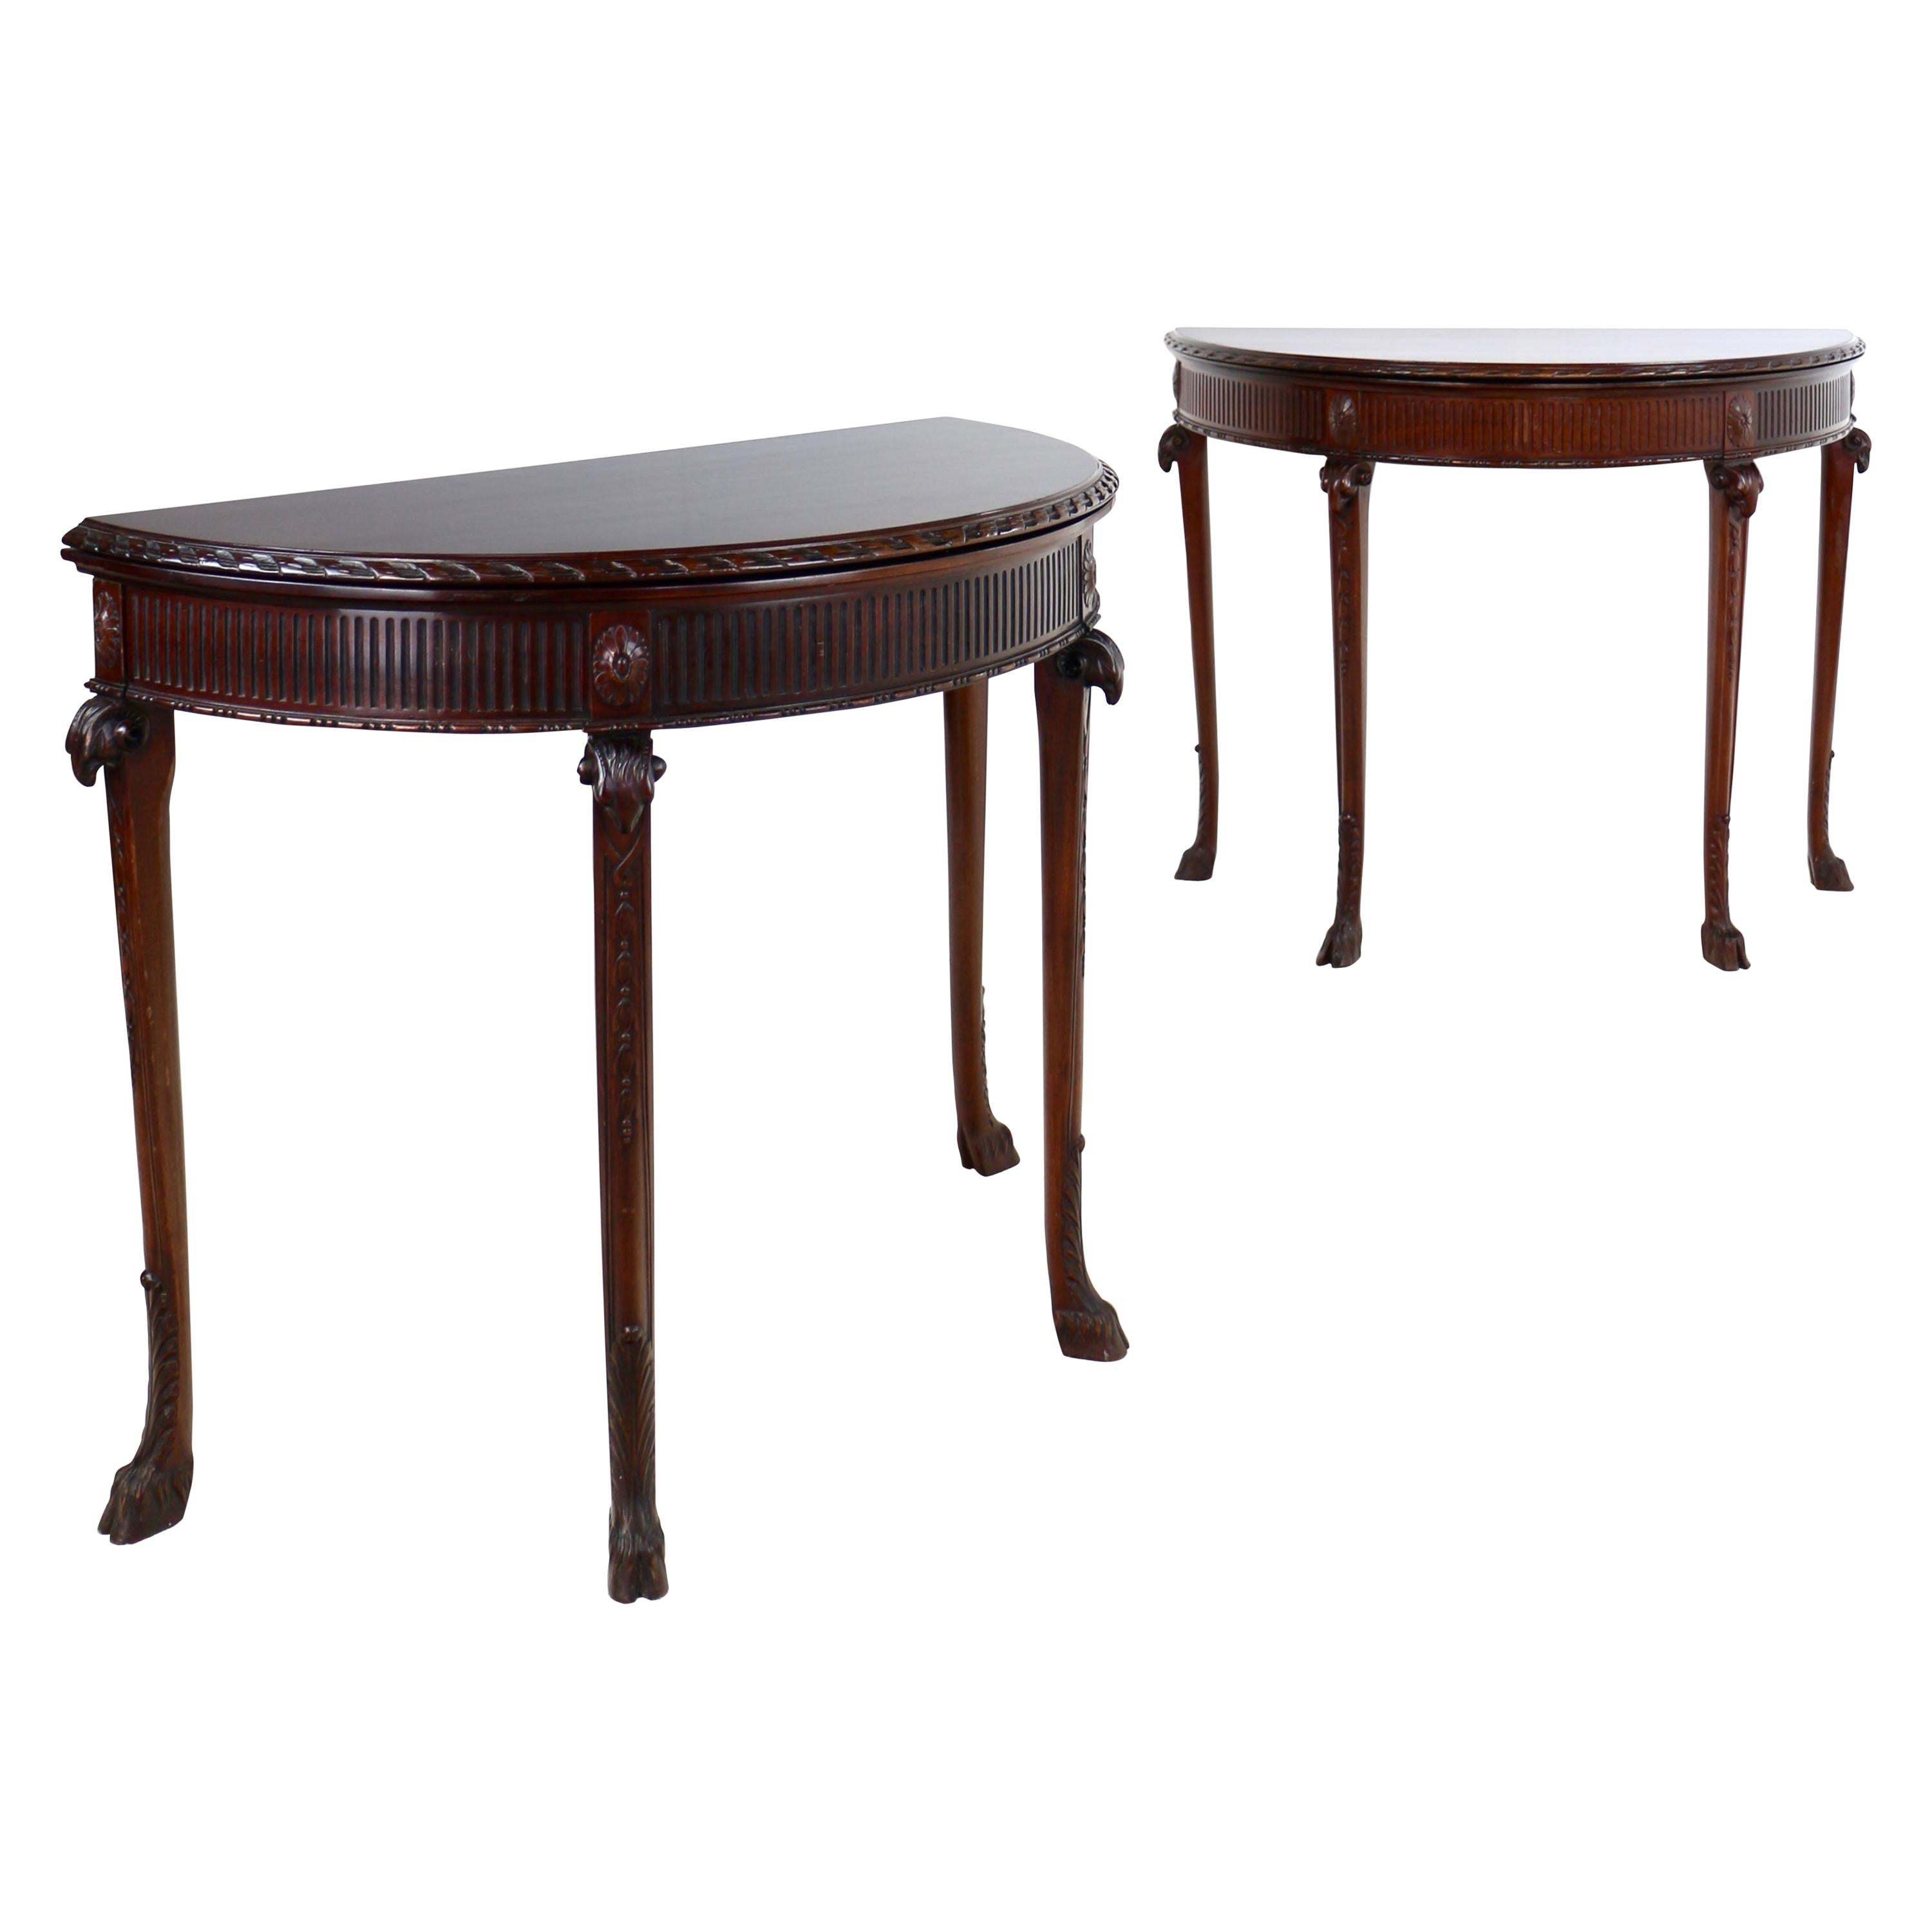 Pair of George III Neoclassical Style Mahogany Demi-Lune Card Tables, circa 1900